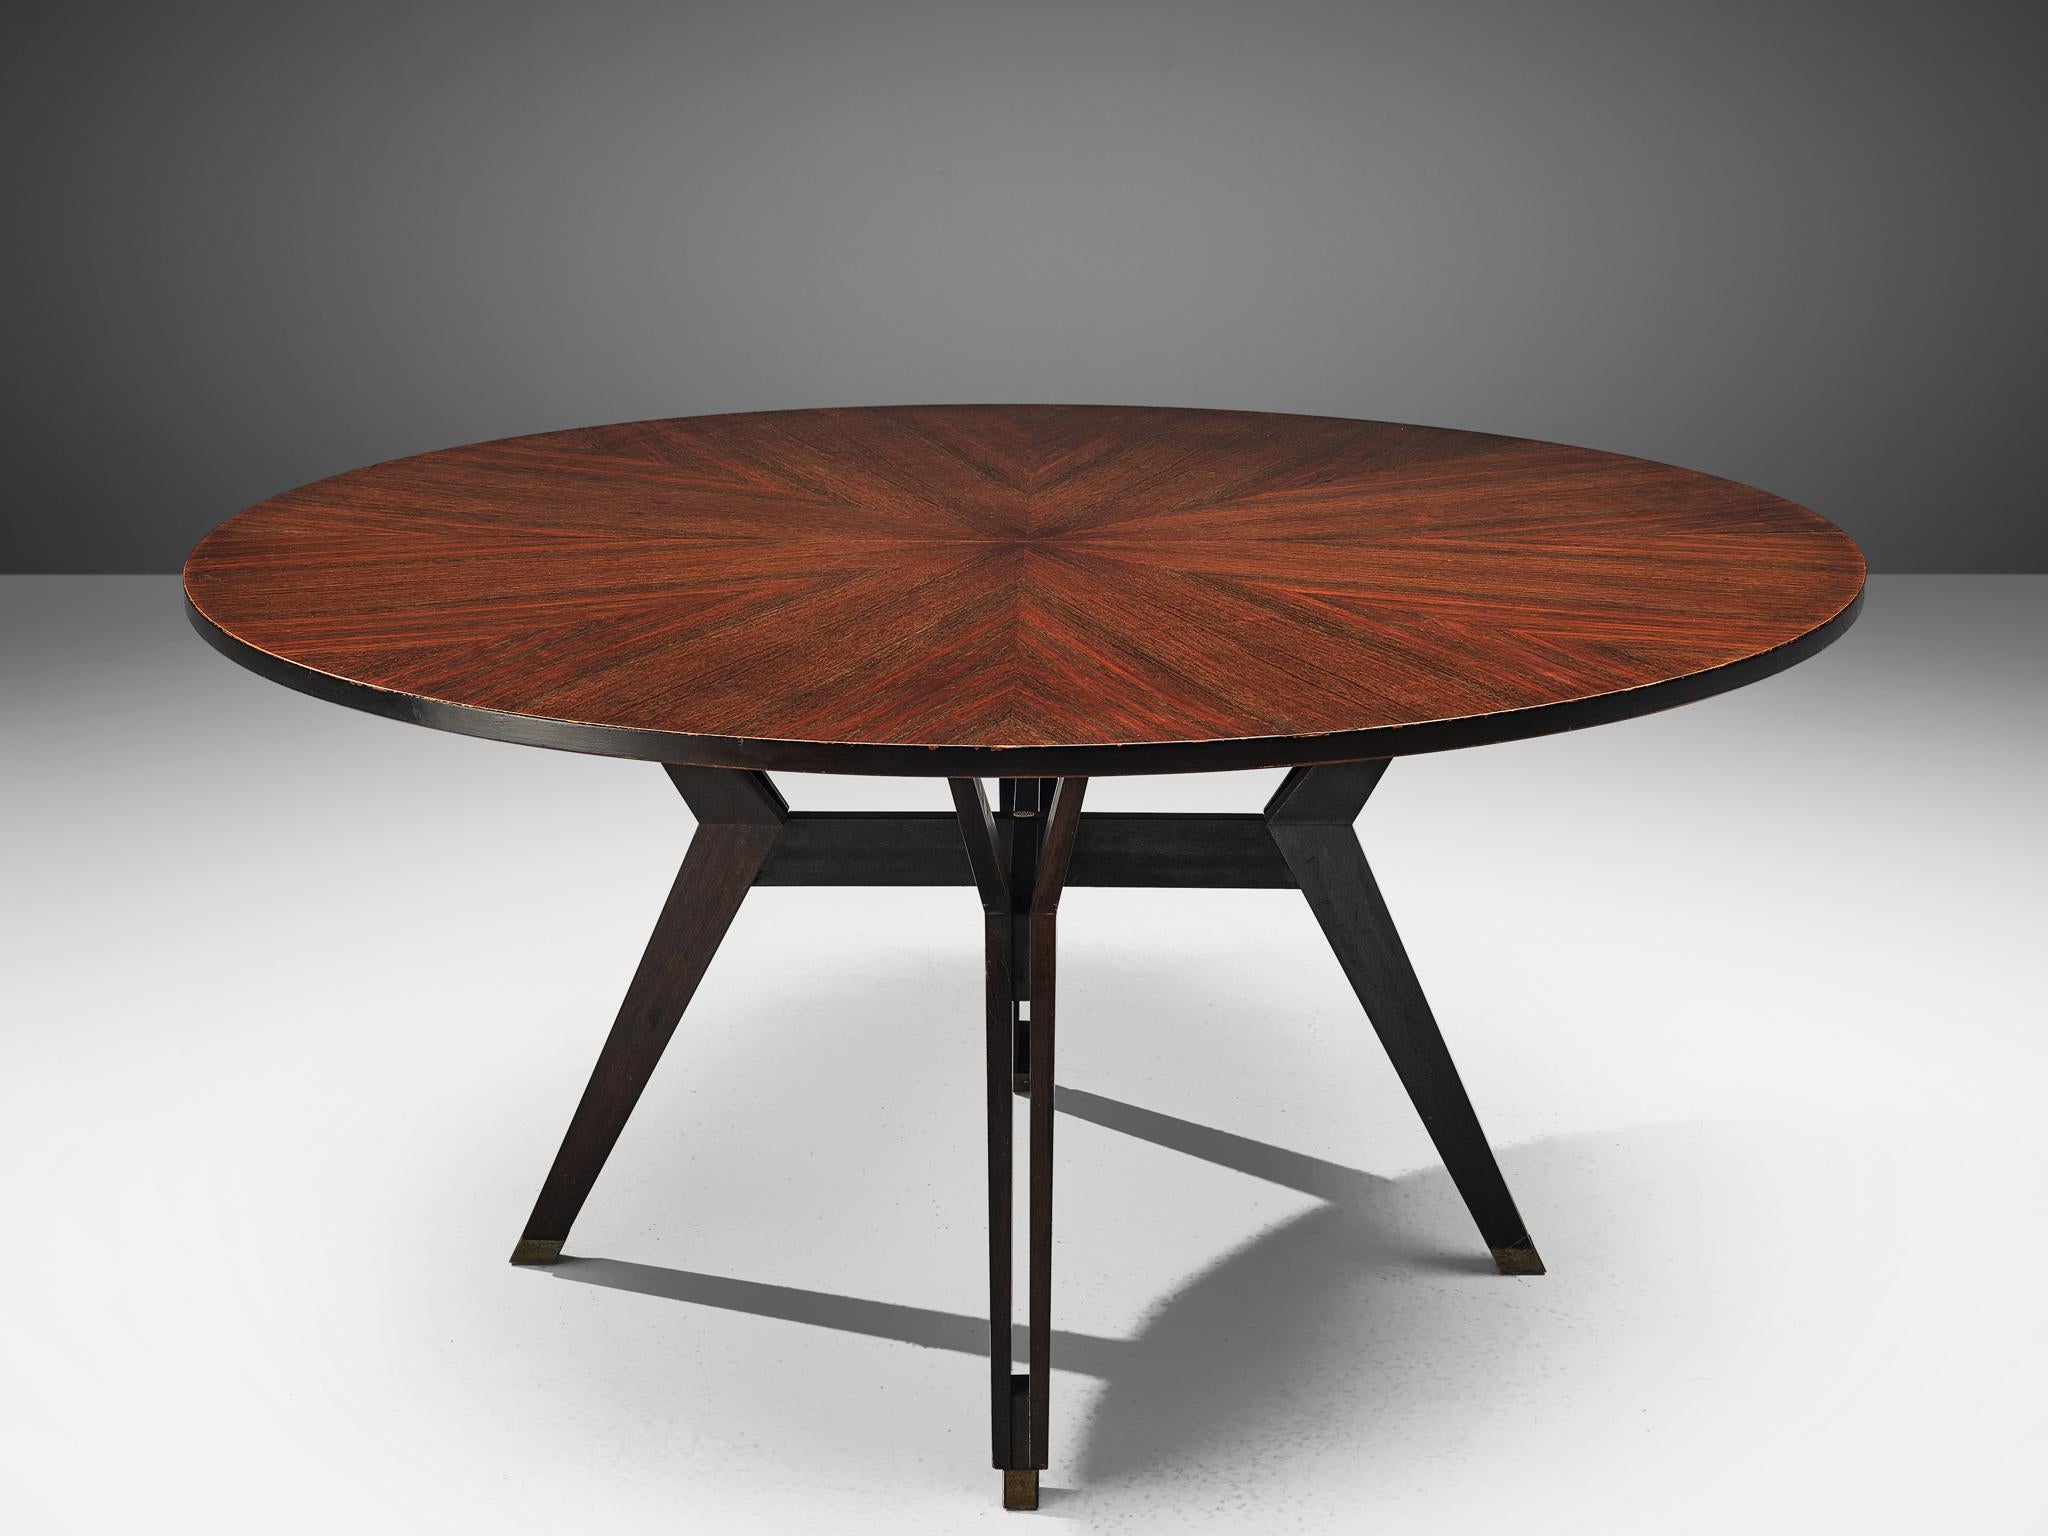 Ico Parisi for MIM Roma, dining table, rosewood and stainless steel, Italy, 1960s. Measures: 1.5m / 4,9 ft

This dining table is executed in Indian rosewood with stainless steel details. The table shows interesting lines and curves and is proved